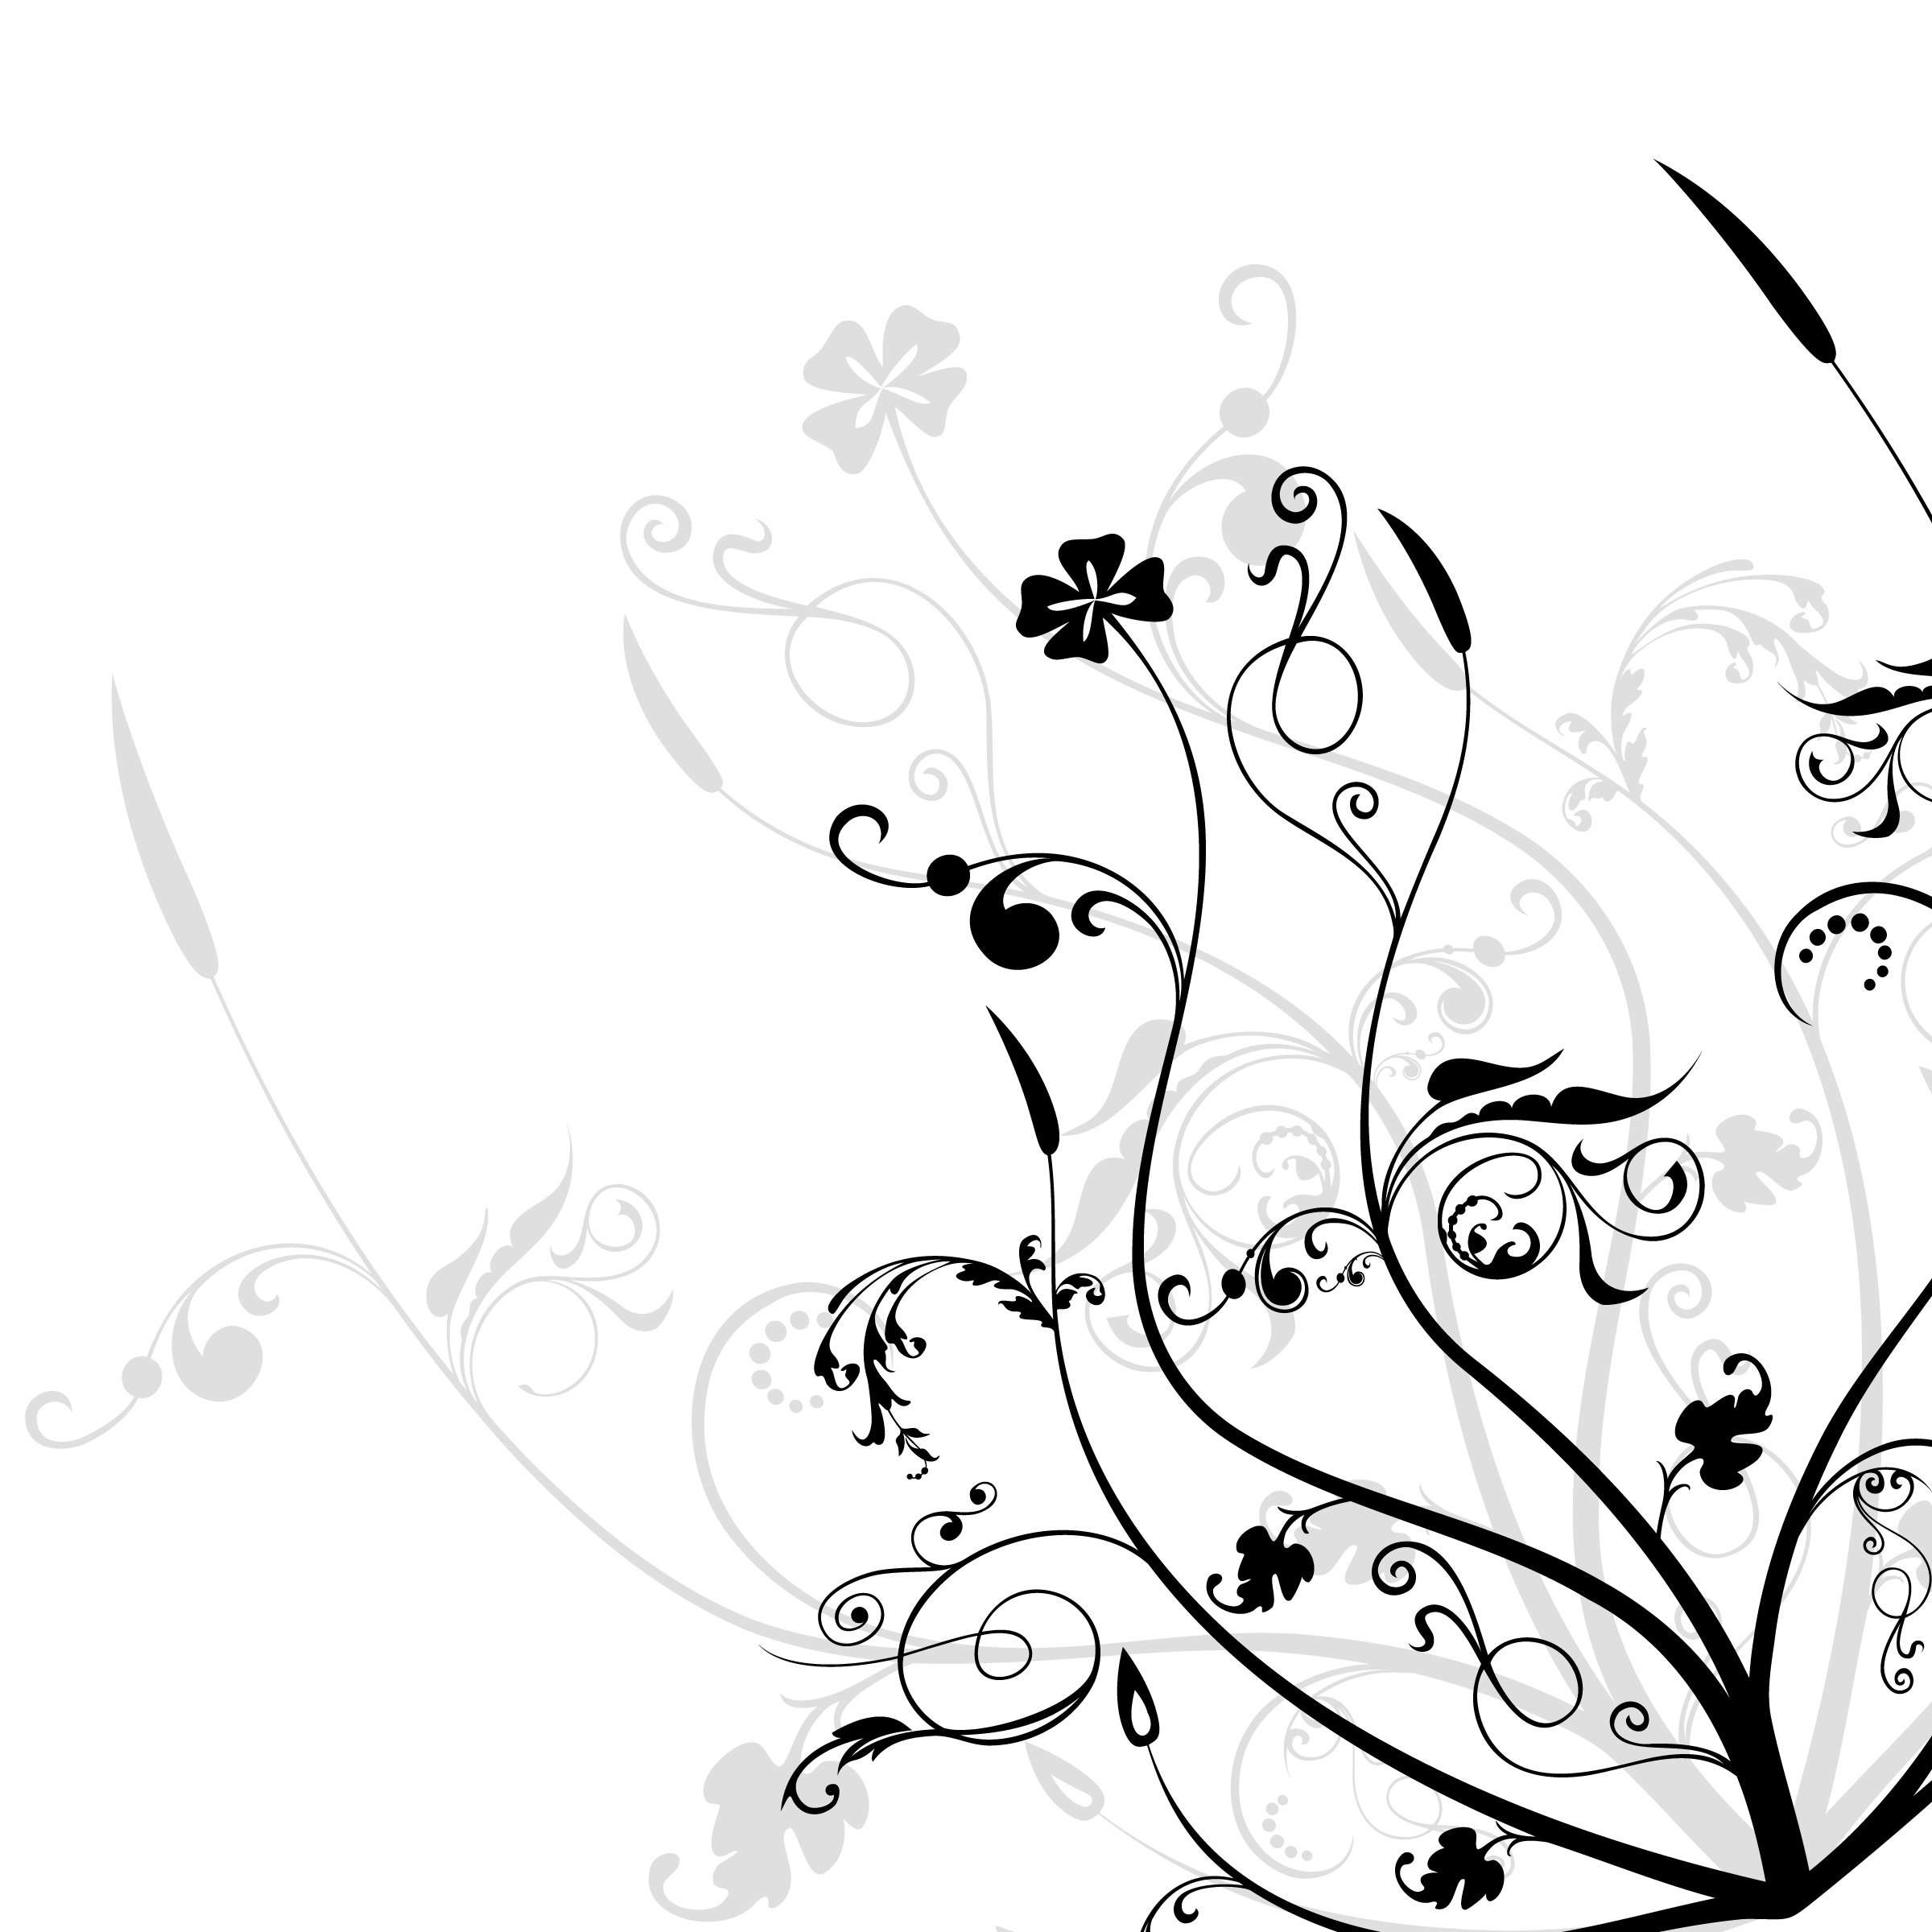 Black and White Line Drawing Wallpapers Top Free Black and White Line